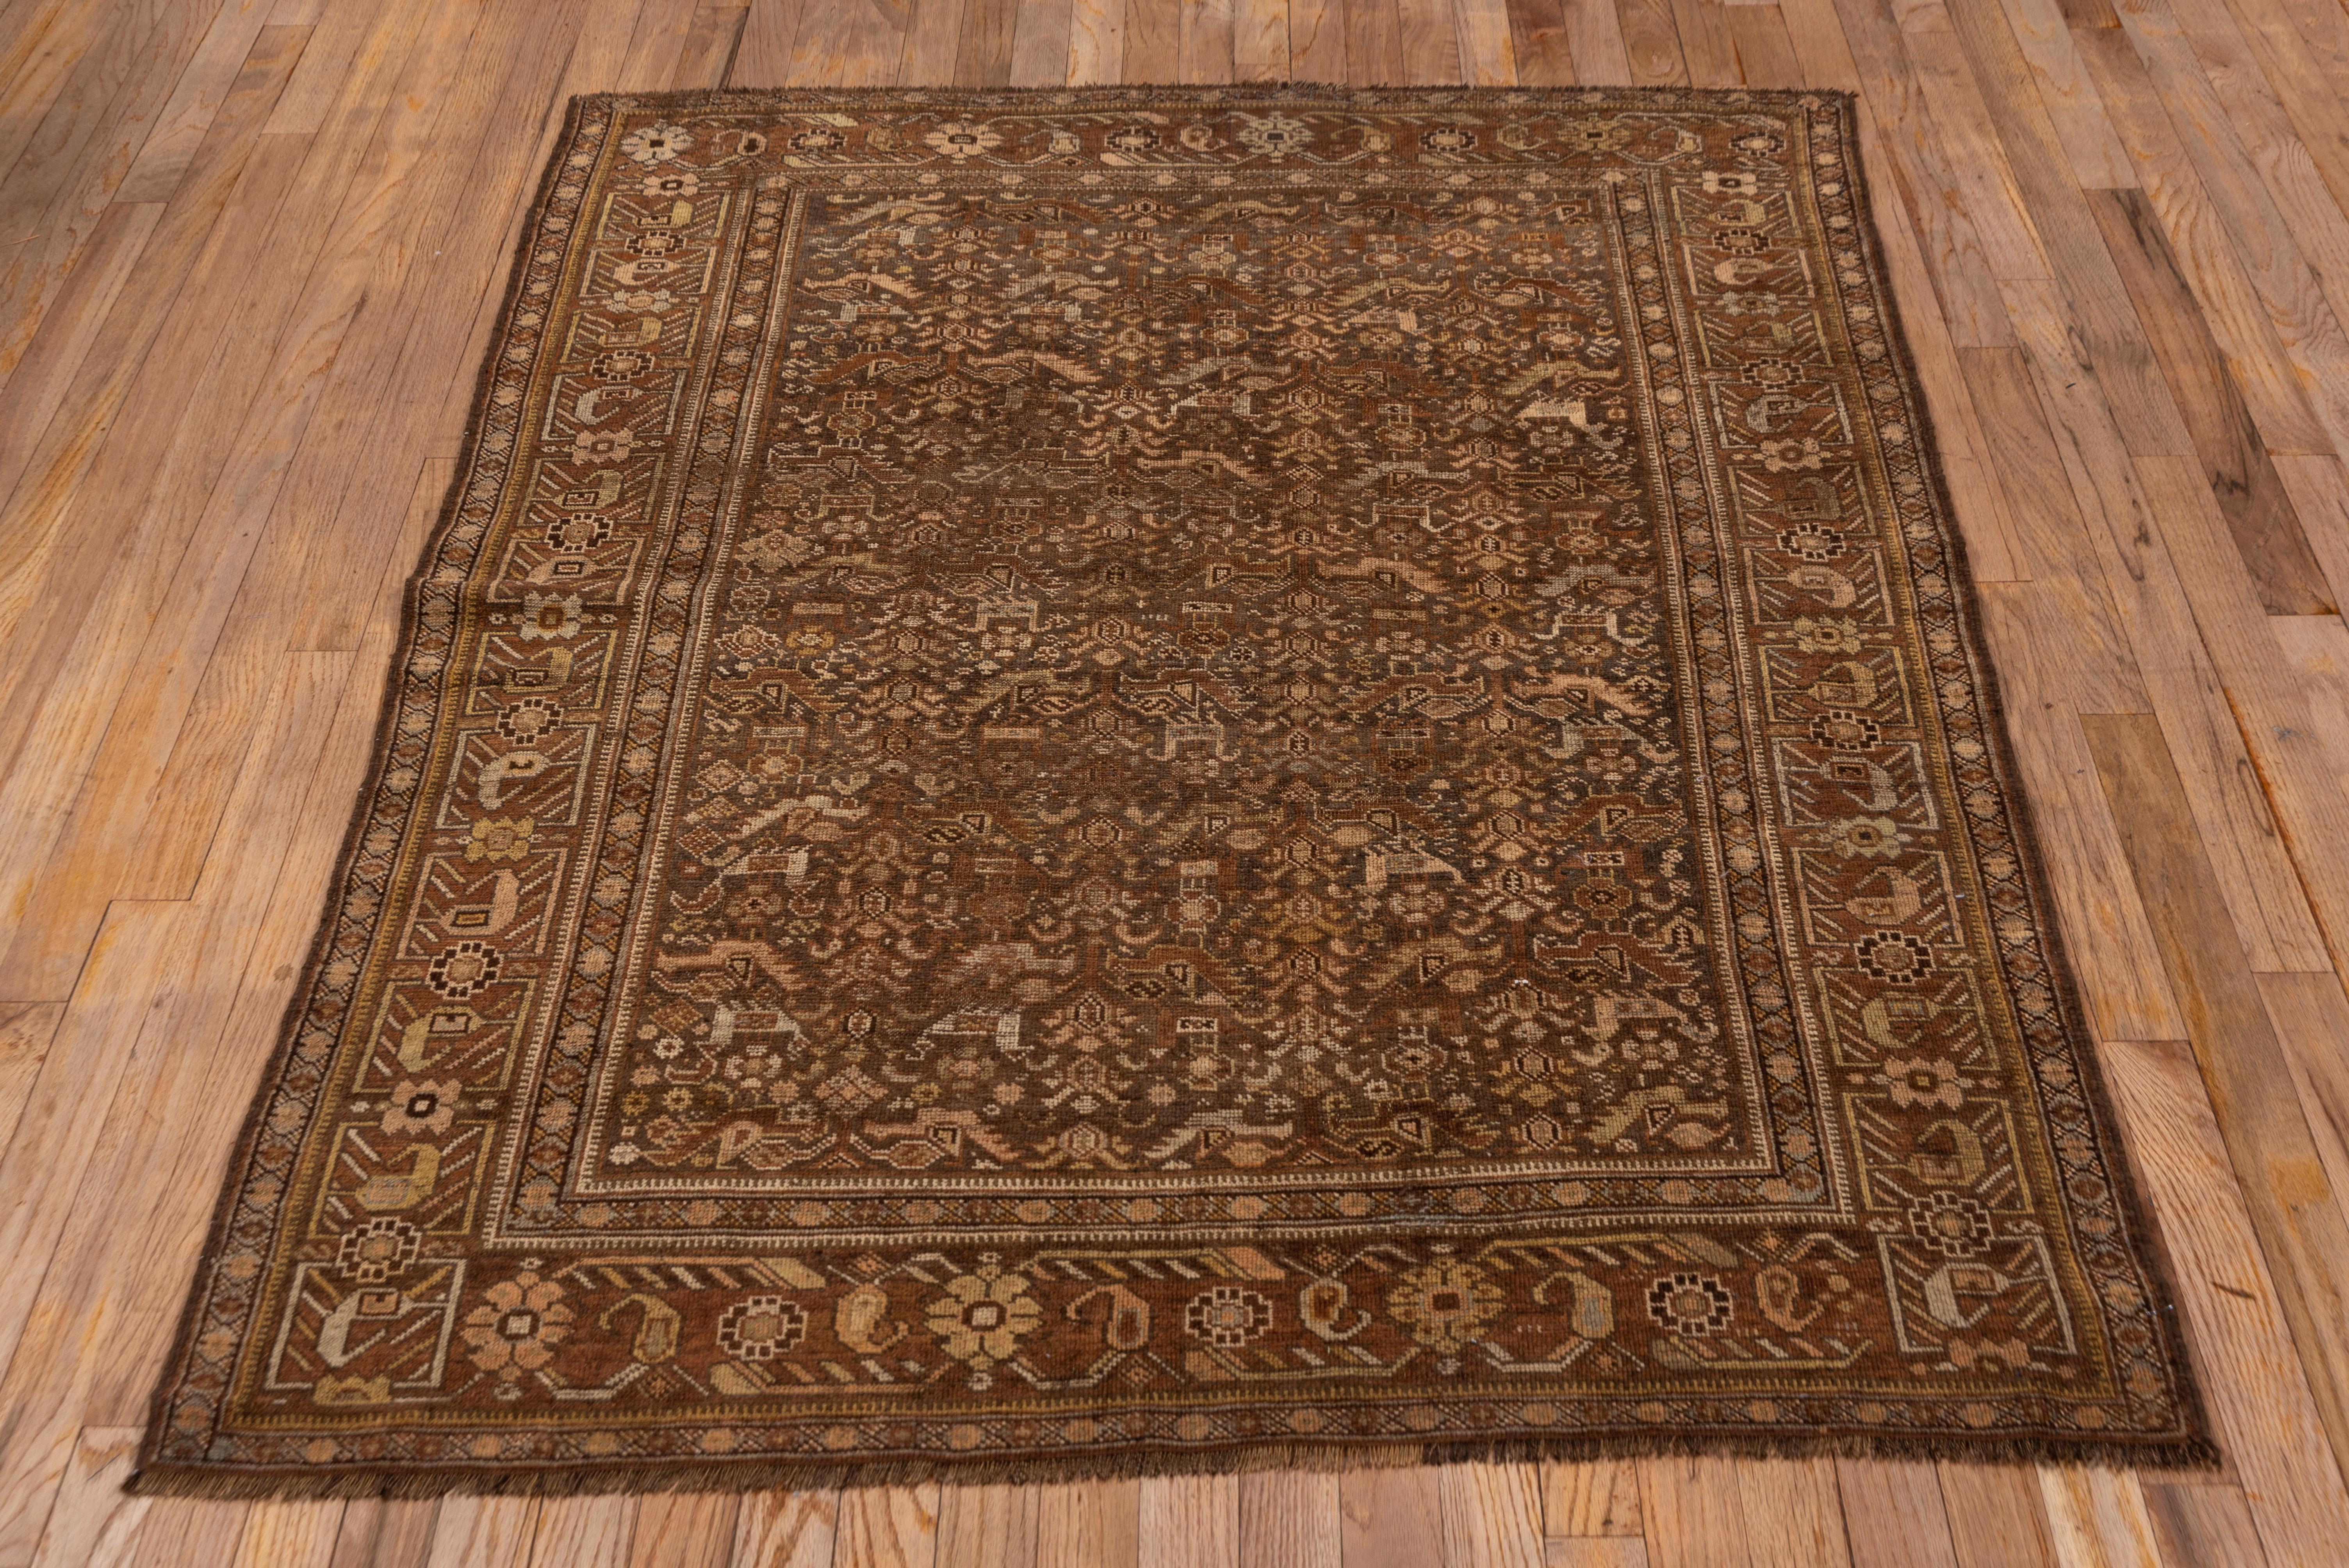 Hand-Knotted Rustic Persian Shiraz Pictorial Rug, Brown & Rust Tones, circa 1920s For Sale